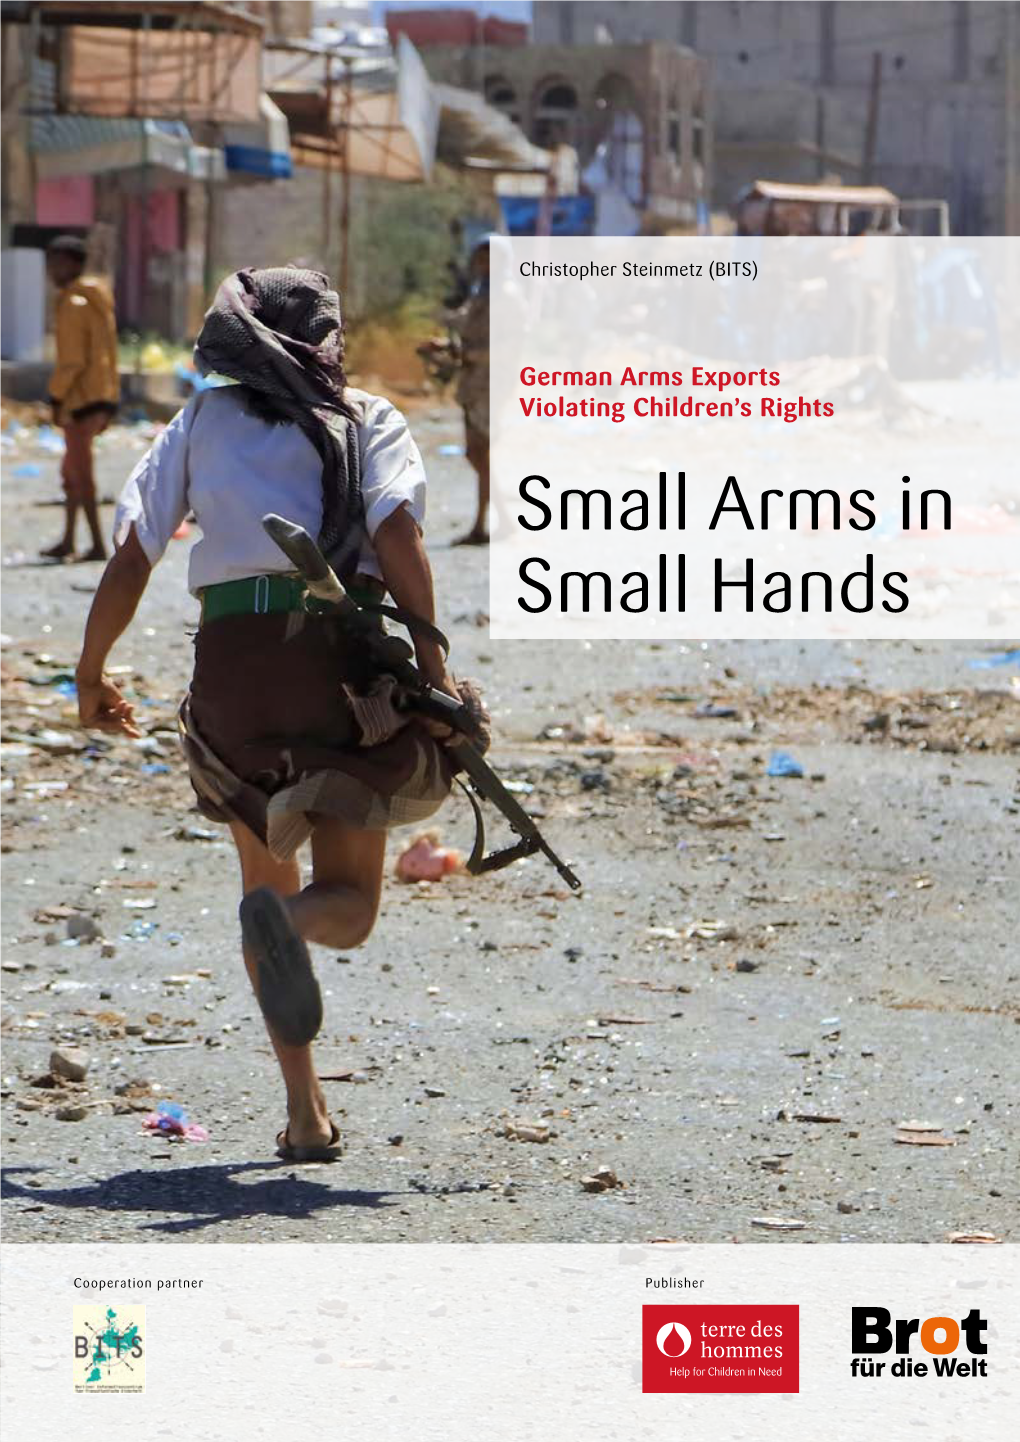 Small Arms in Small Hands